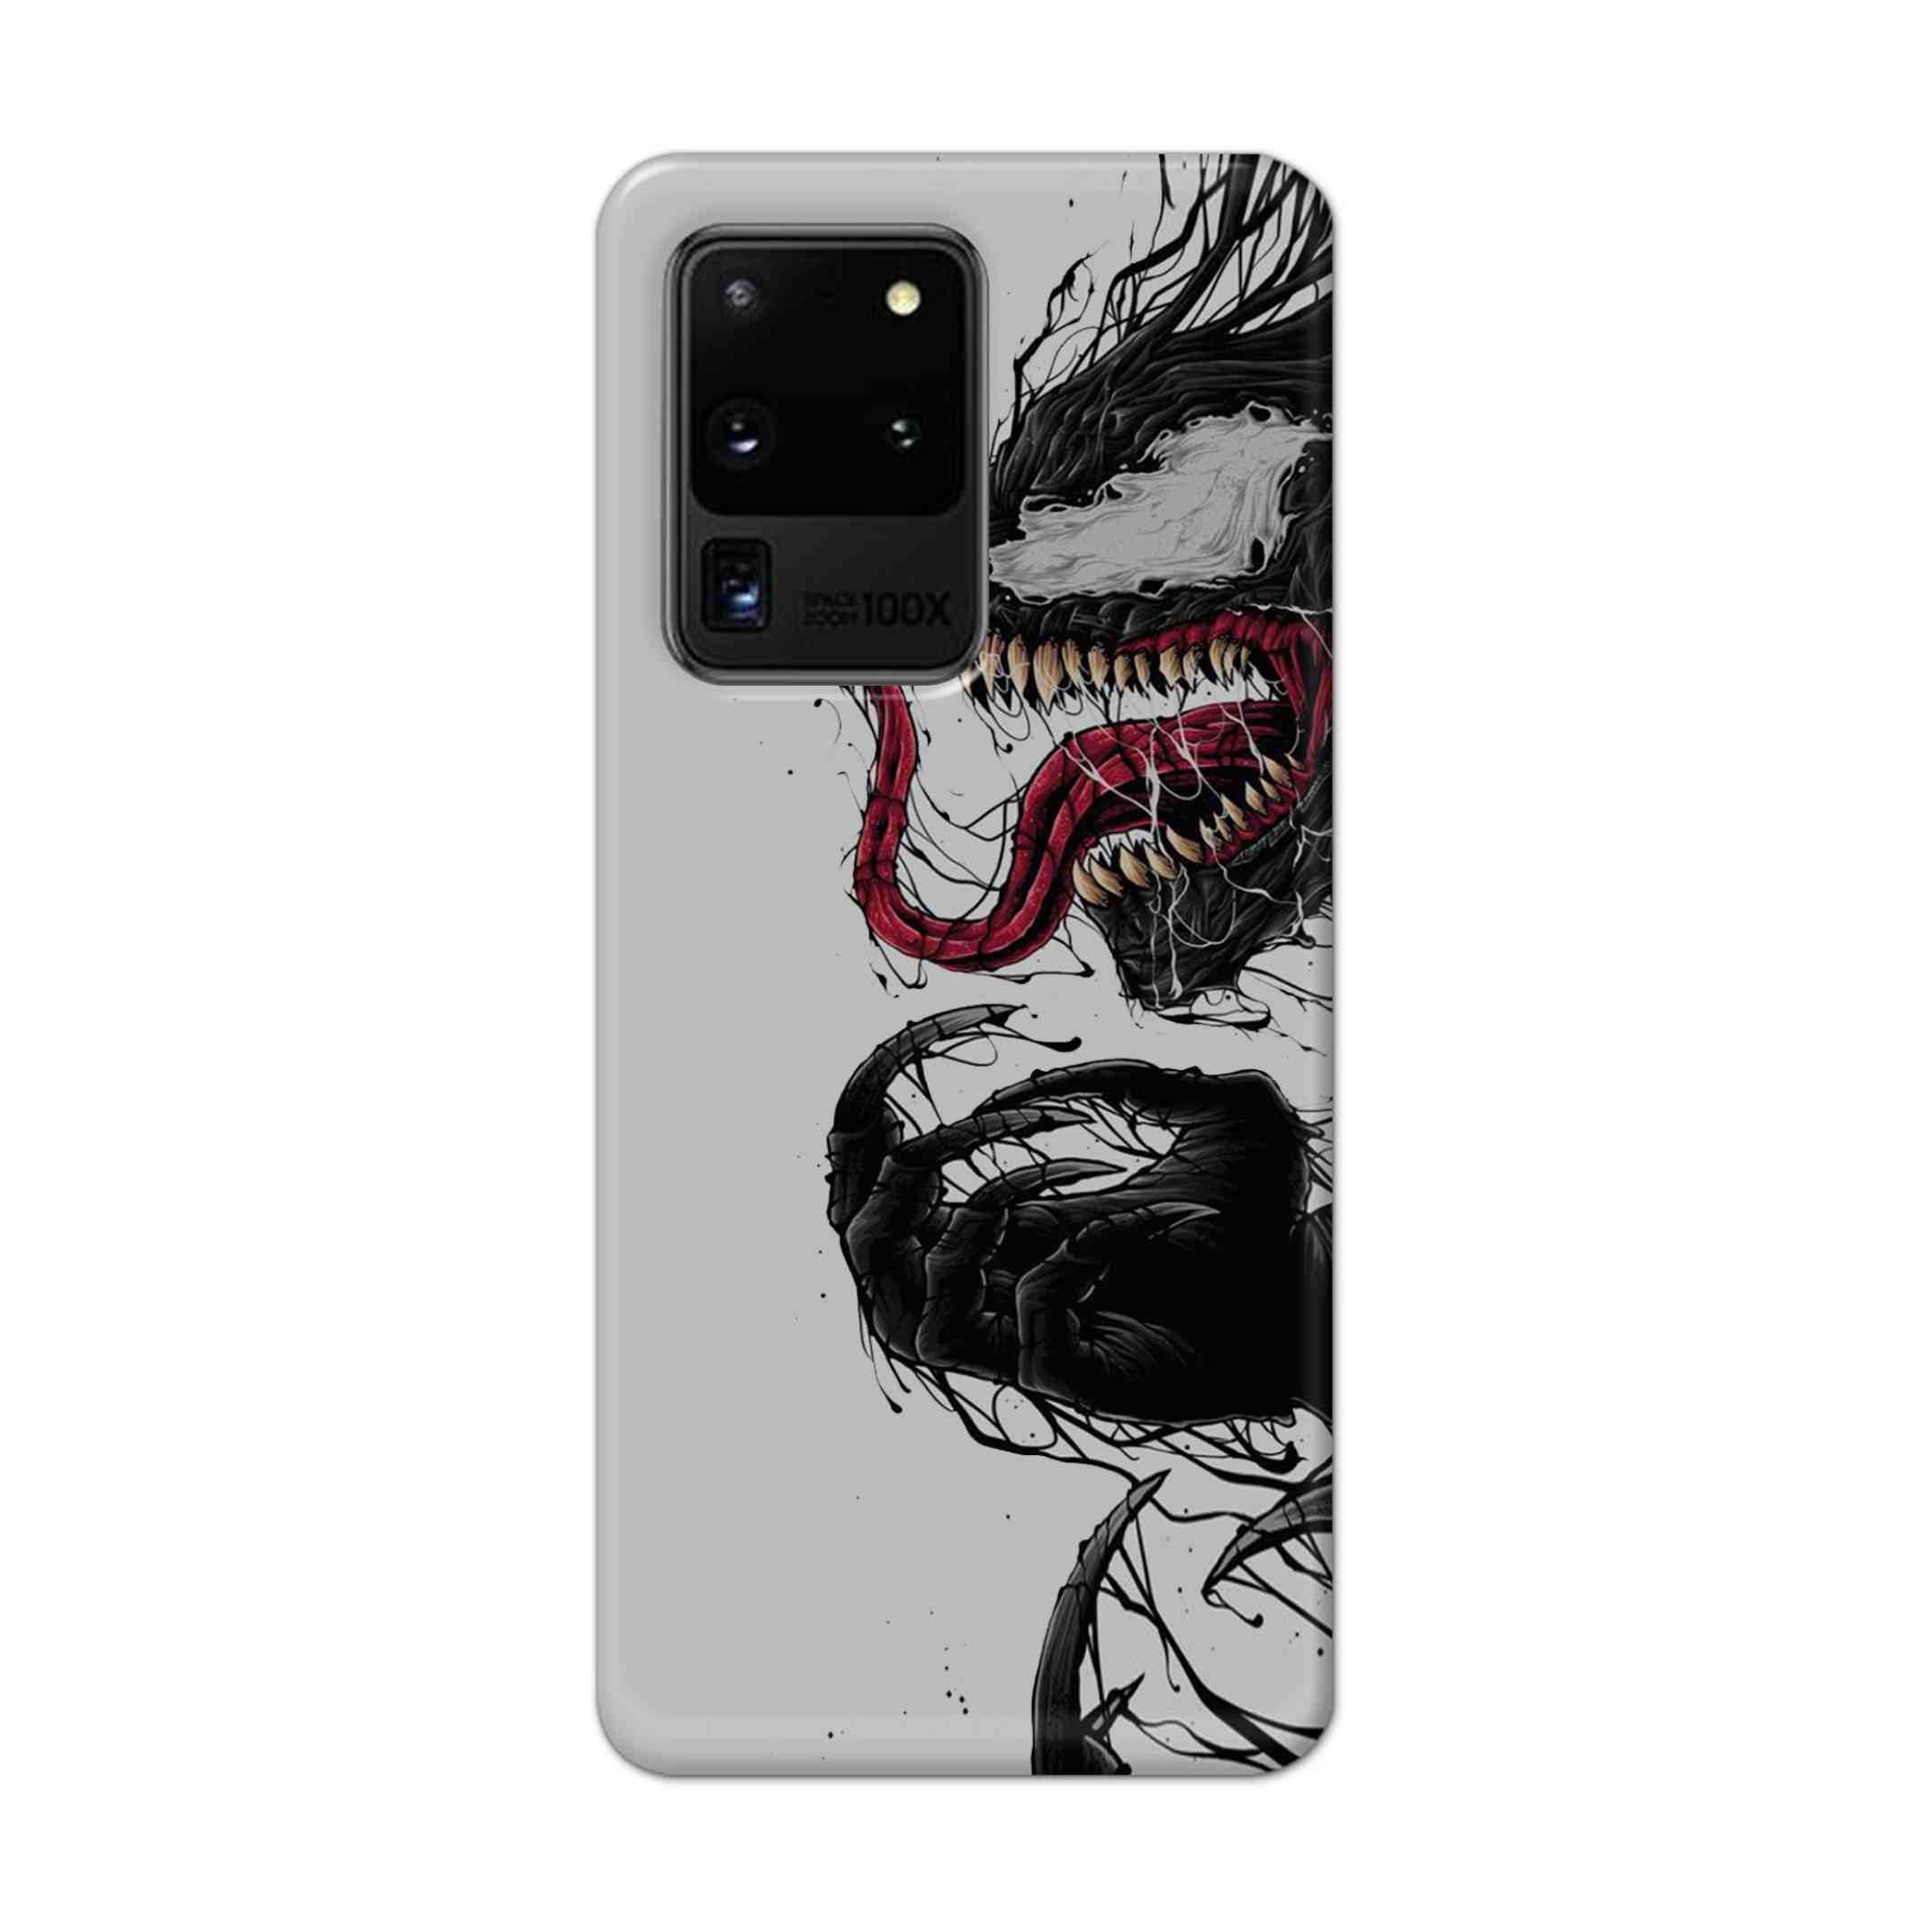 Buy Venom Crazy Hard Back Mobile Phone Case Cover For Samsung Galaxy S20 Ultra Online